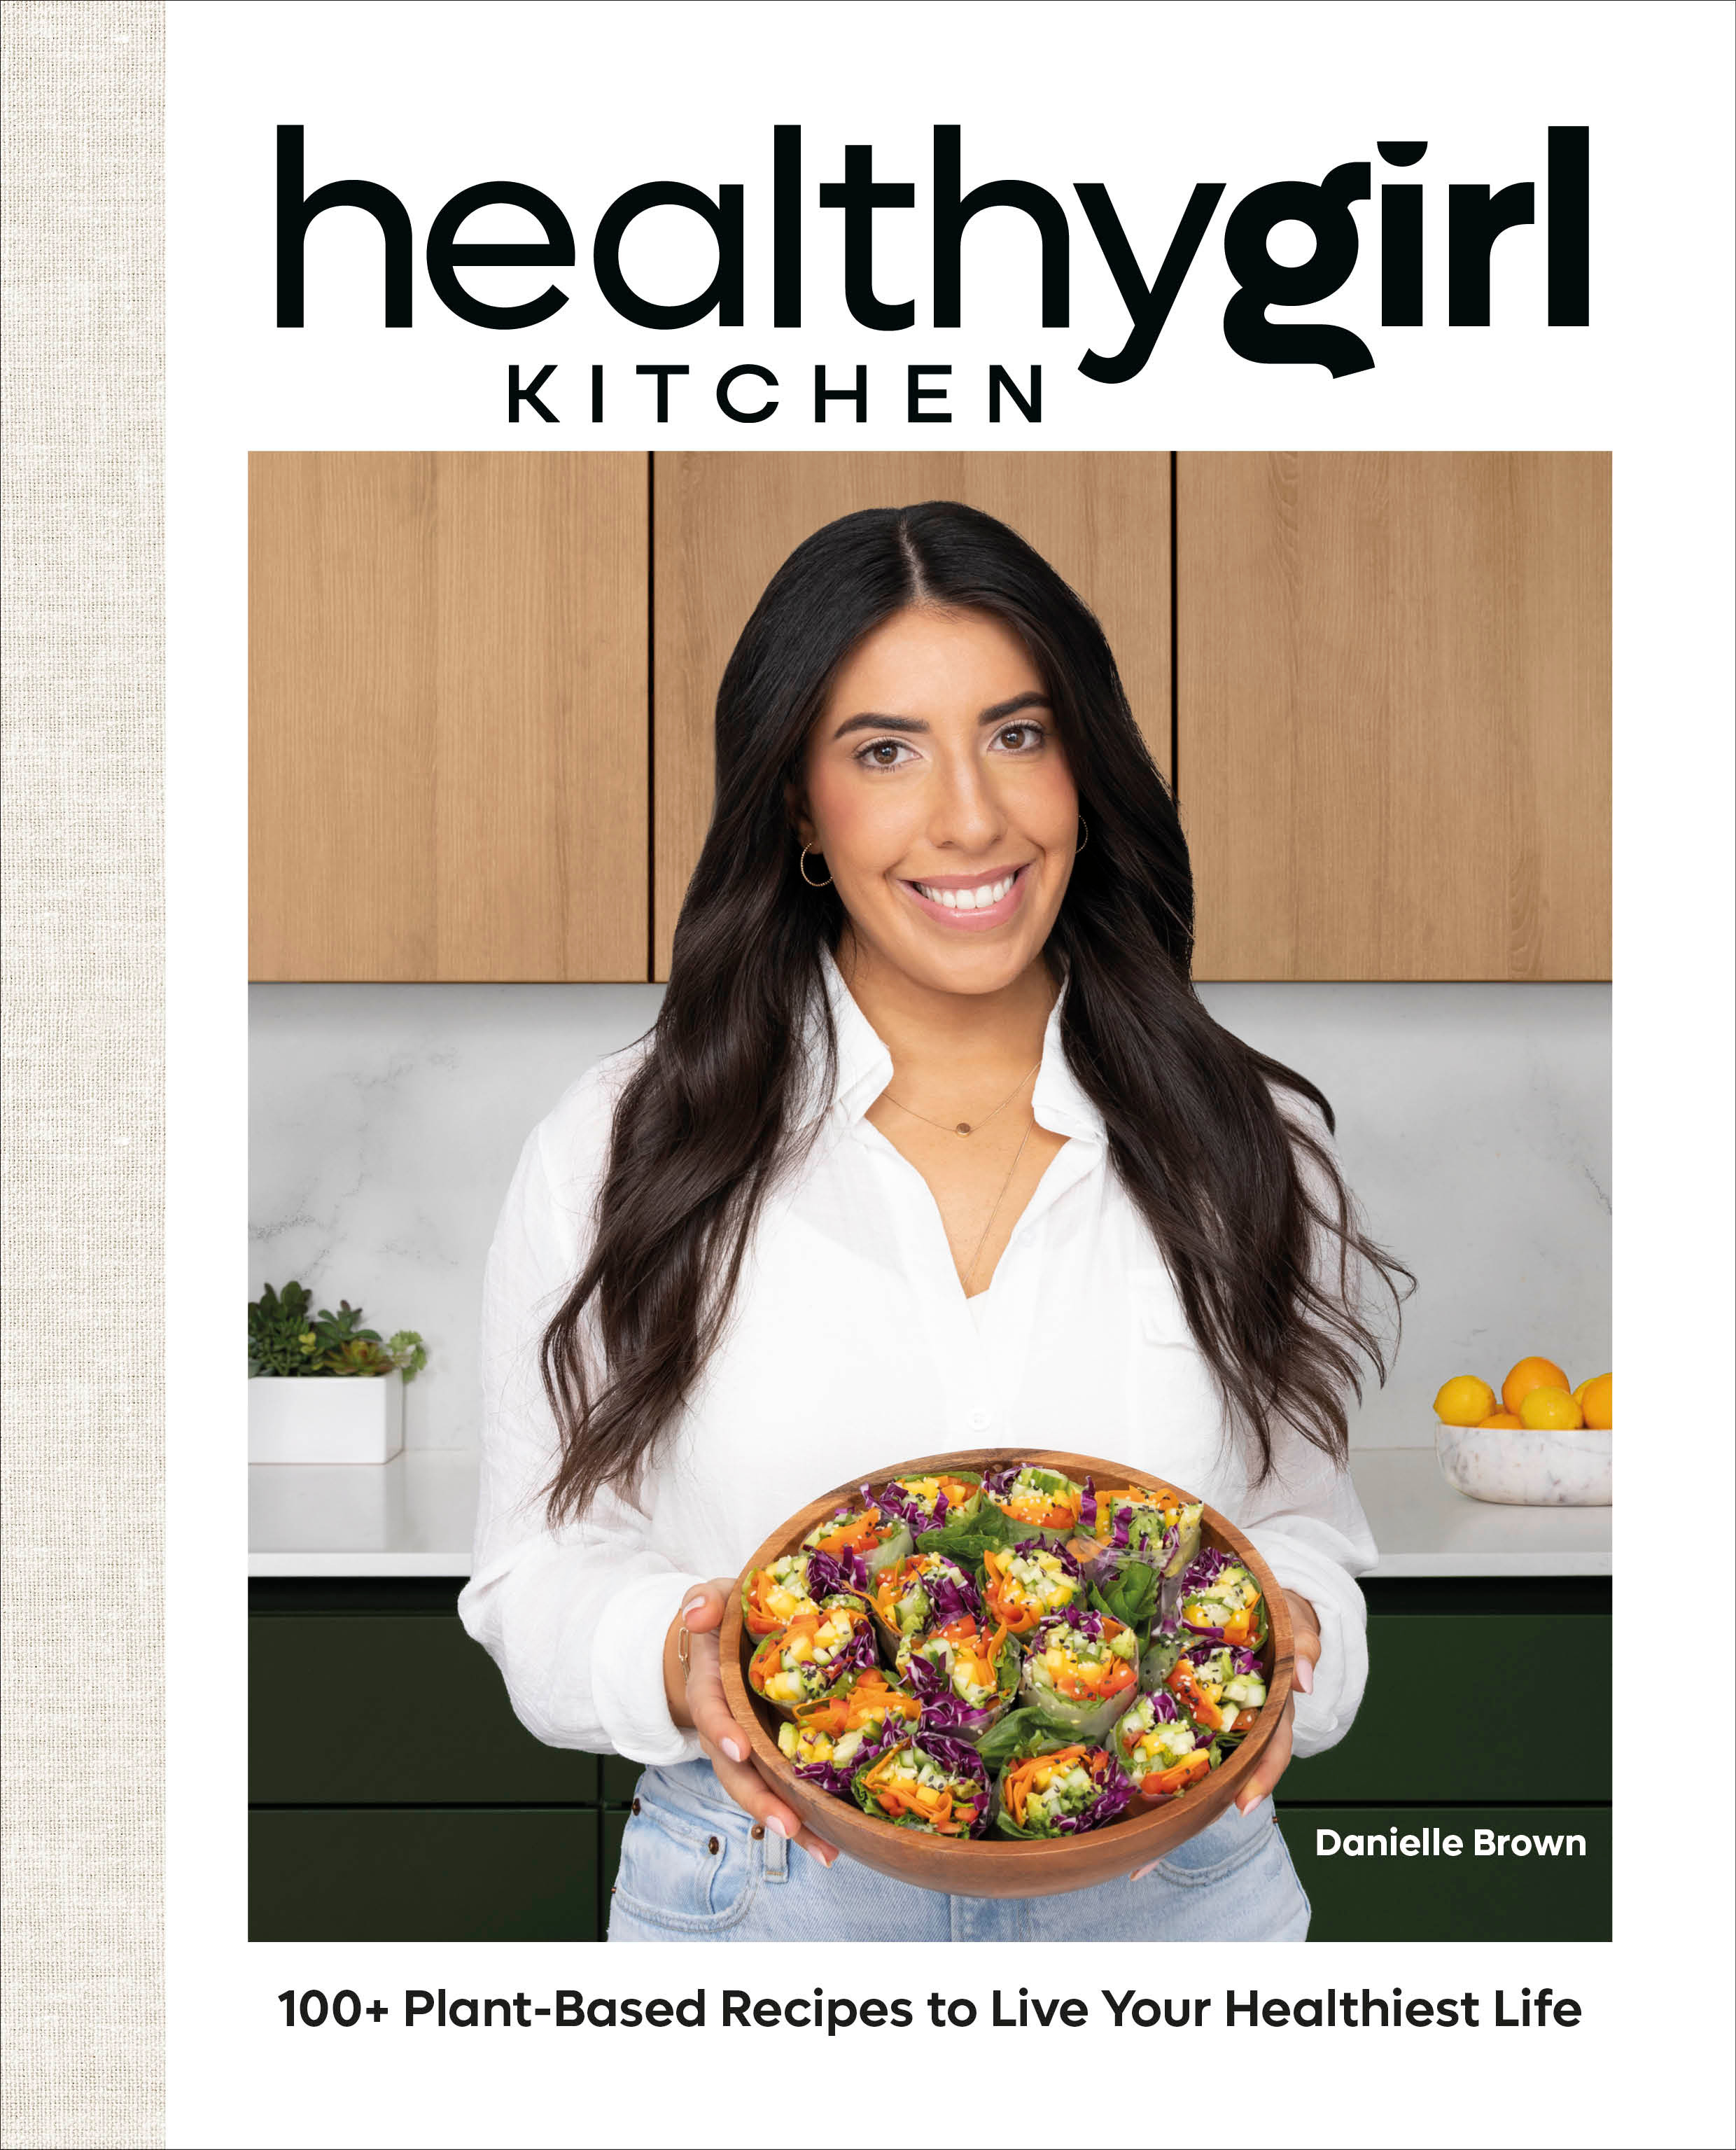 HealthyGirl Kitchen : 100+ Plant-Based Recipes to Live Your Healthiest Life | Brown, Danielle (Auteur)